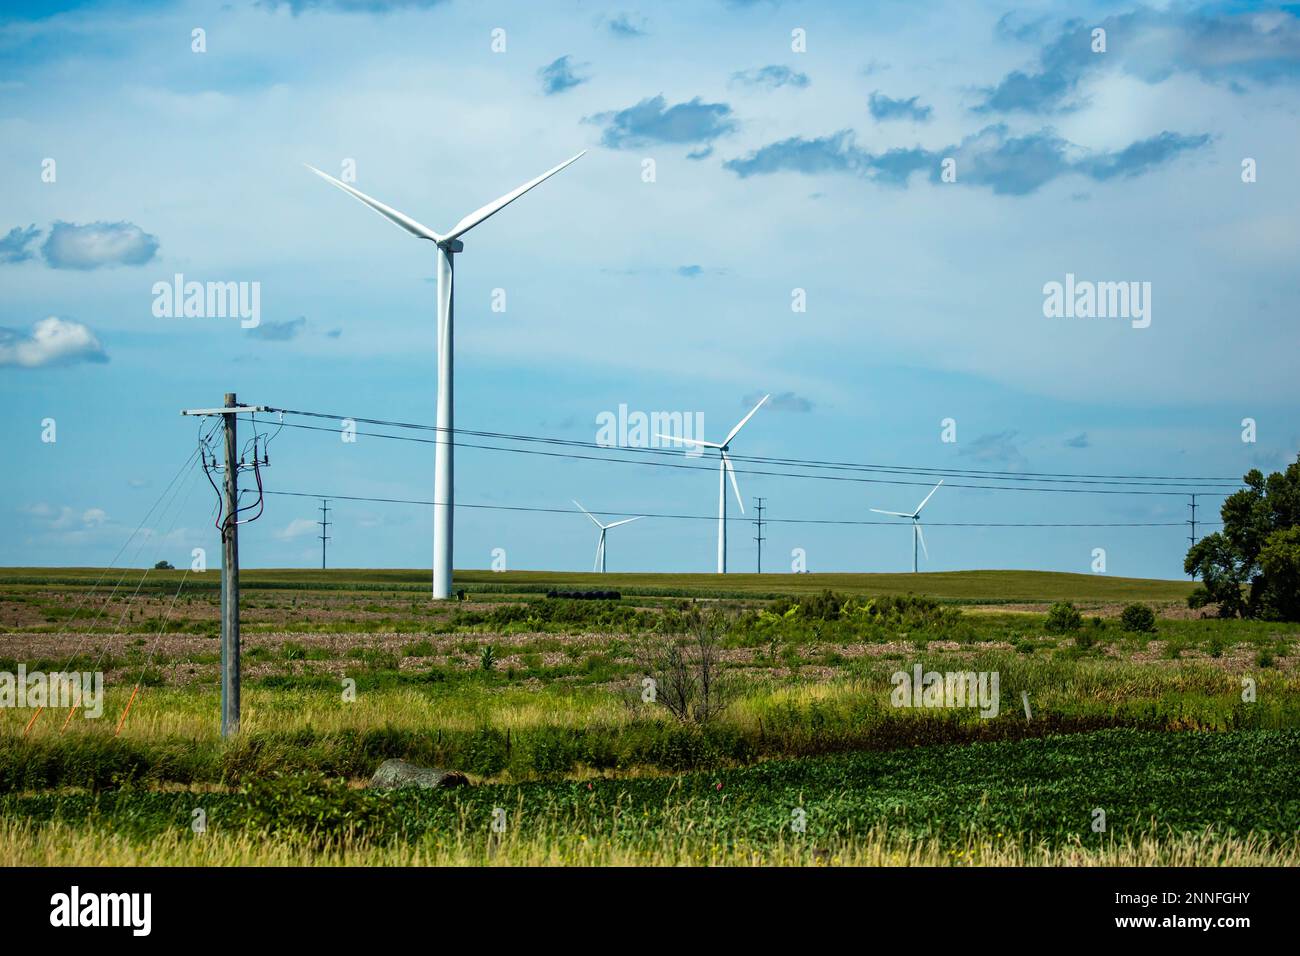 Telephone poles and wind turbines generating power in the midwest united states, horizontal Stock Photo